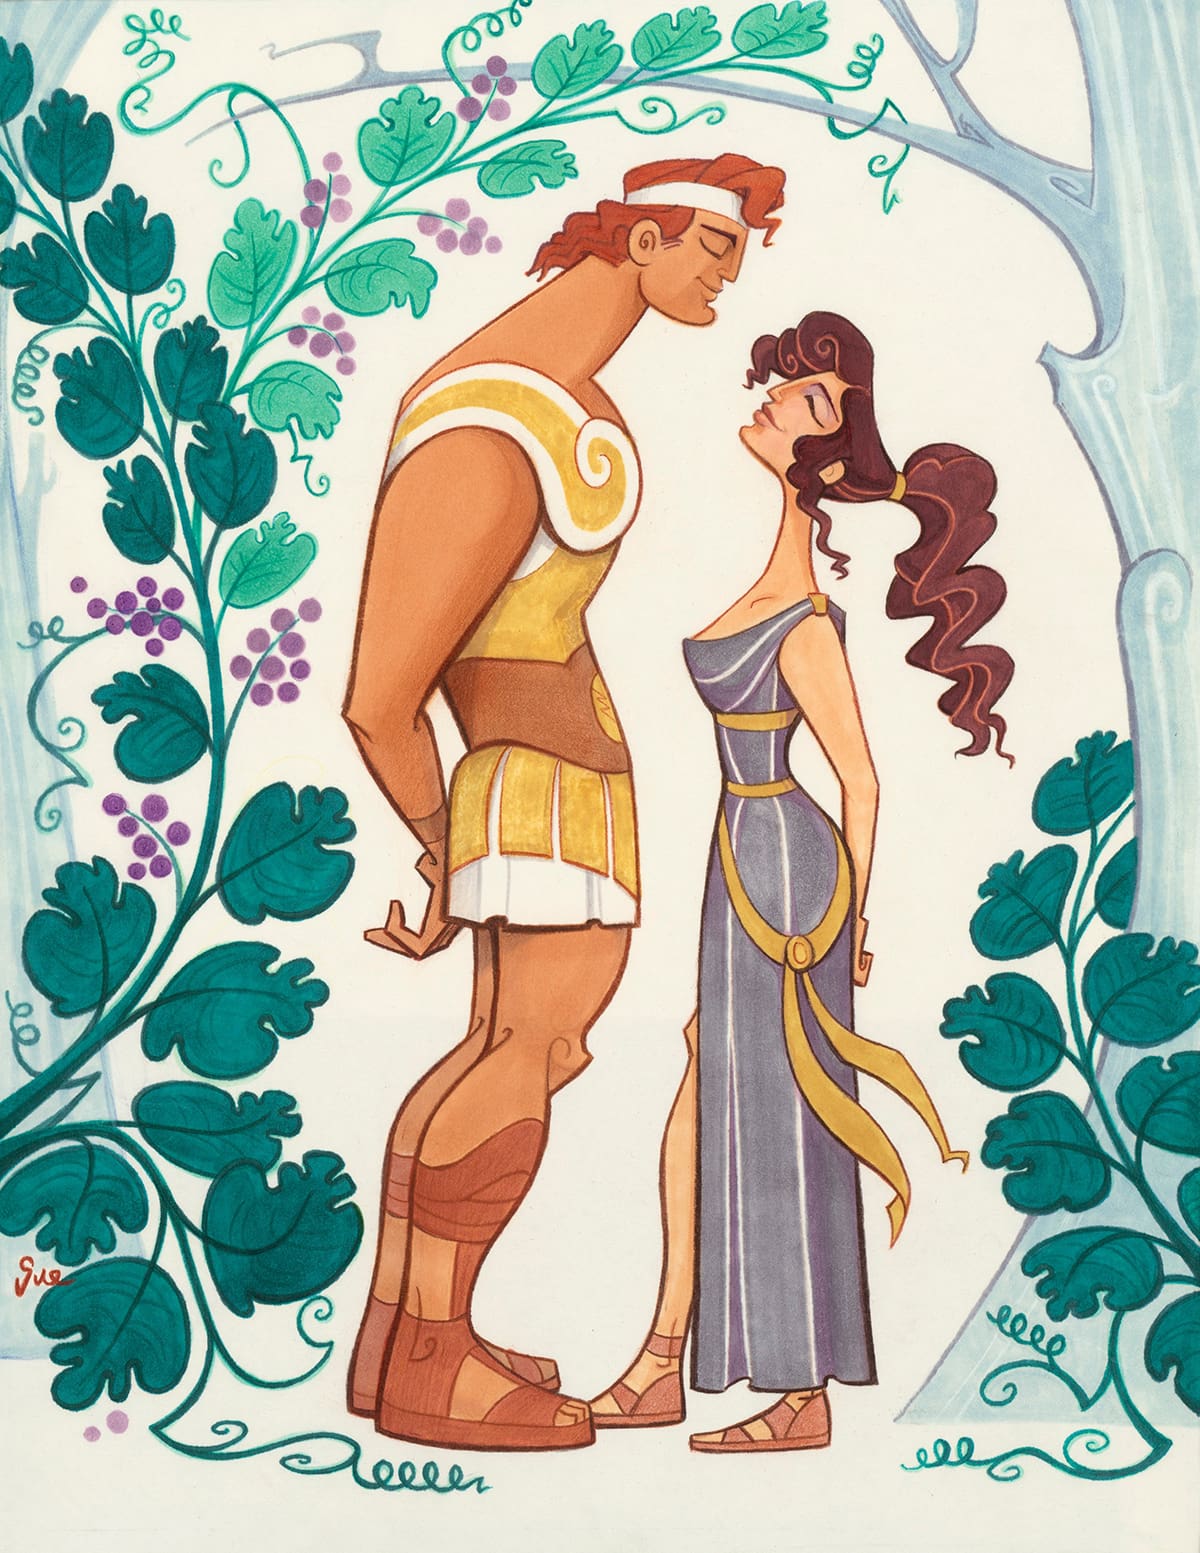 Development drawing by Nichols for "Hercules." On the film, Nichols supervised the look of the film as it went through the production process, assuring consistency in layout, animation, color styling and effects.